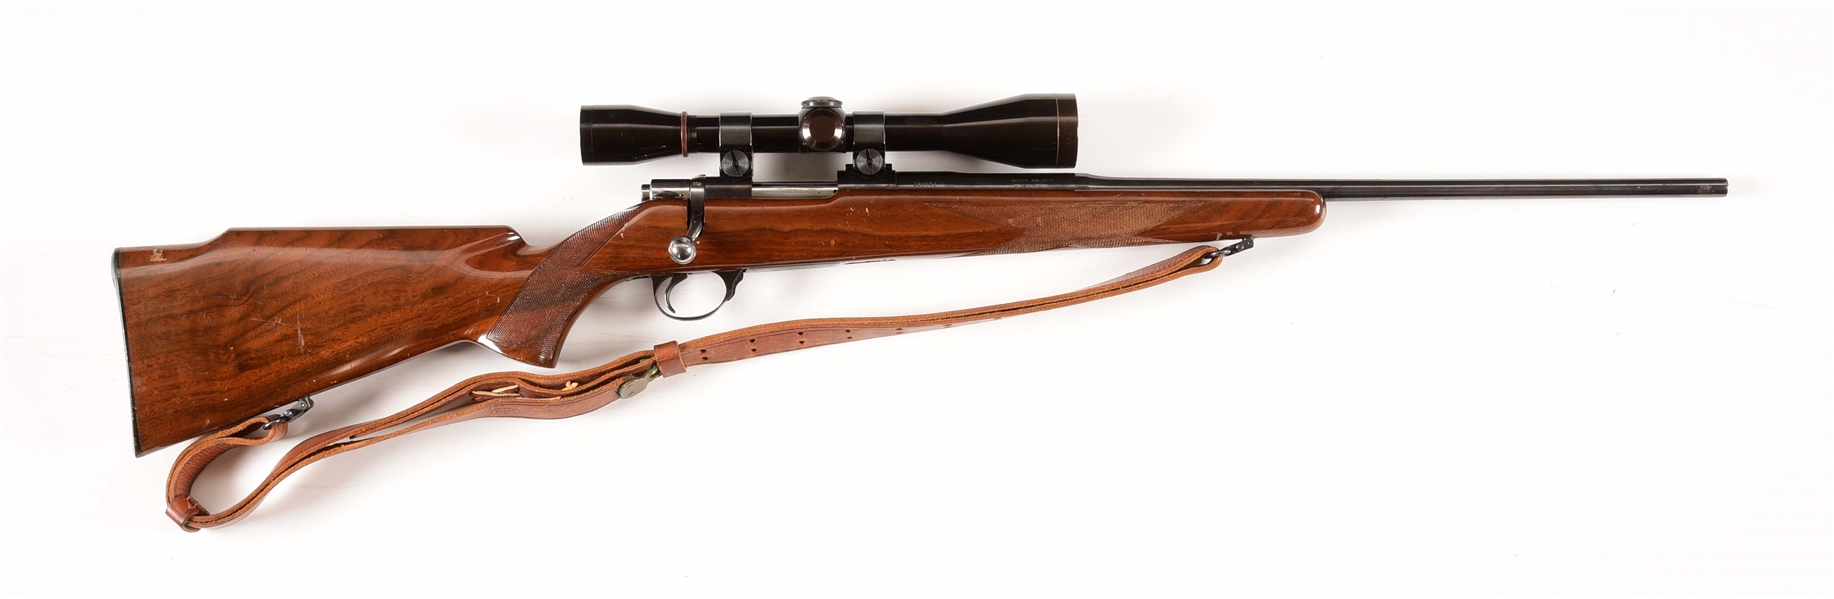 (C) BROWNING SAFARI GRADE BOLT ACTION RIFLE WITH SCOPE.